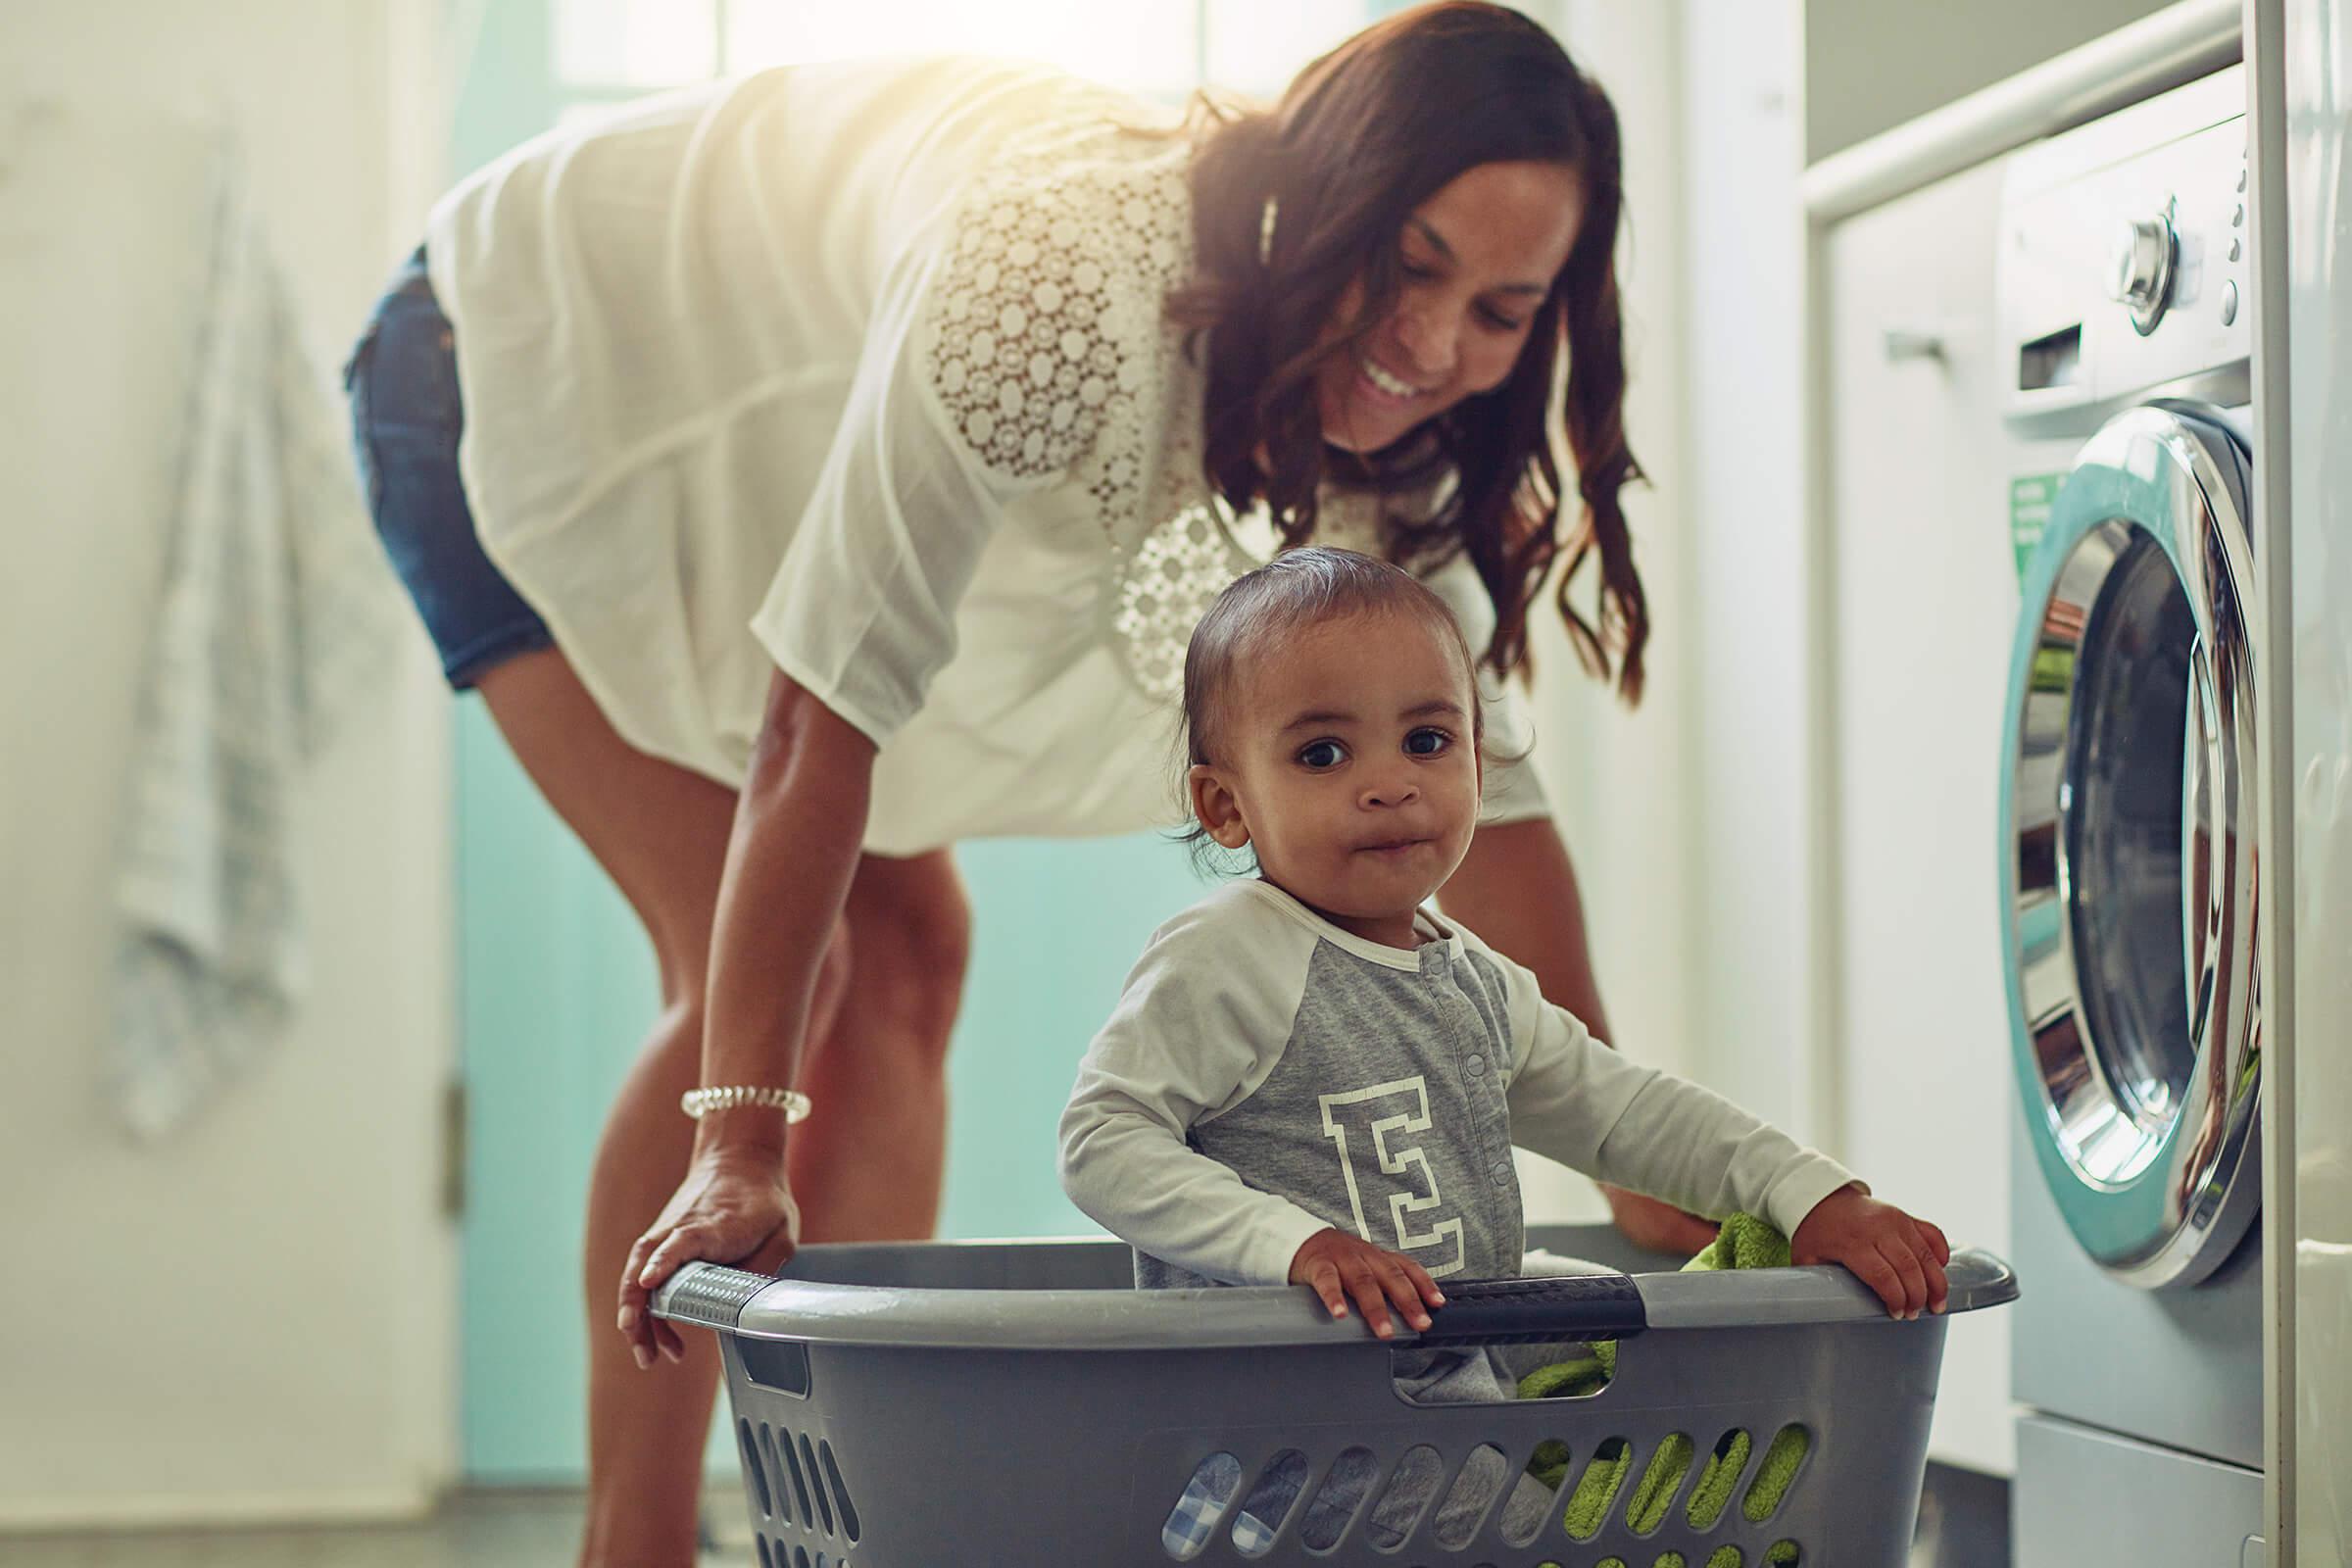 a woman pushing a laundry basket with a child inside